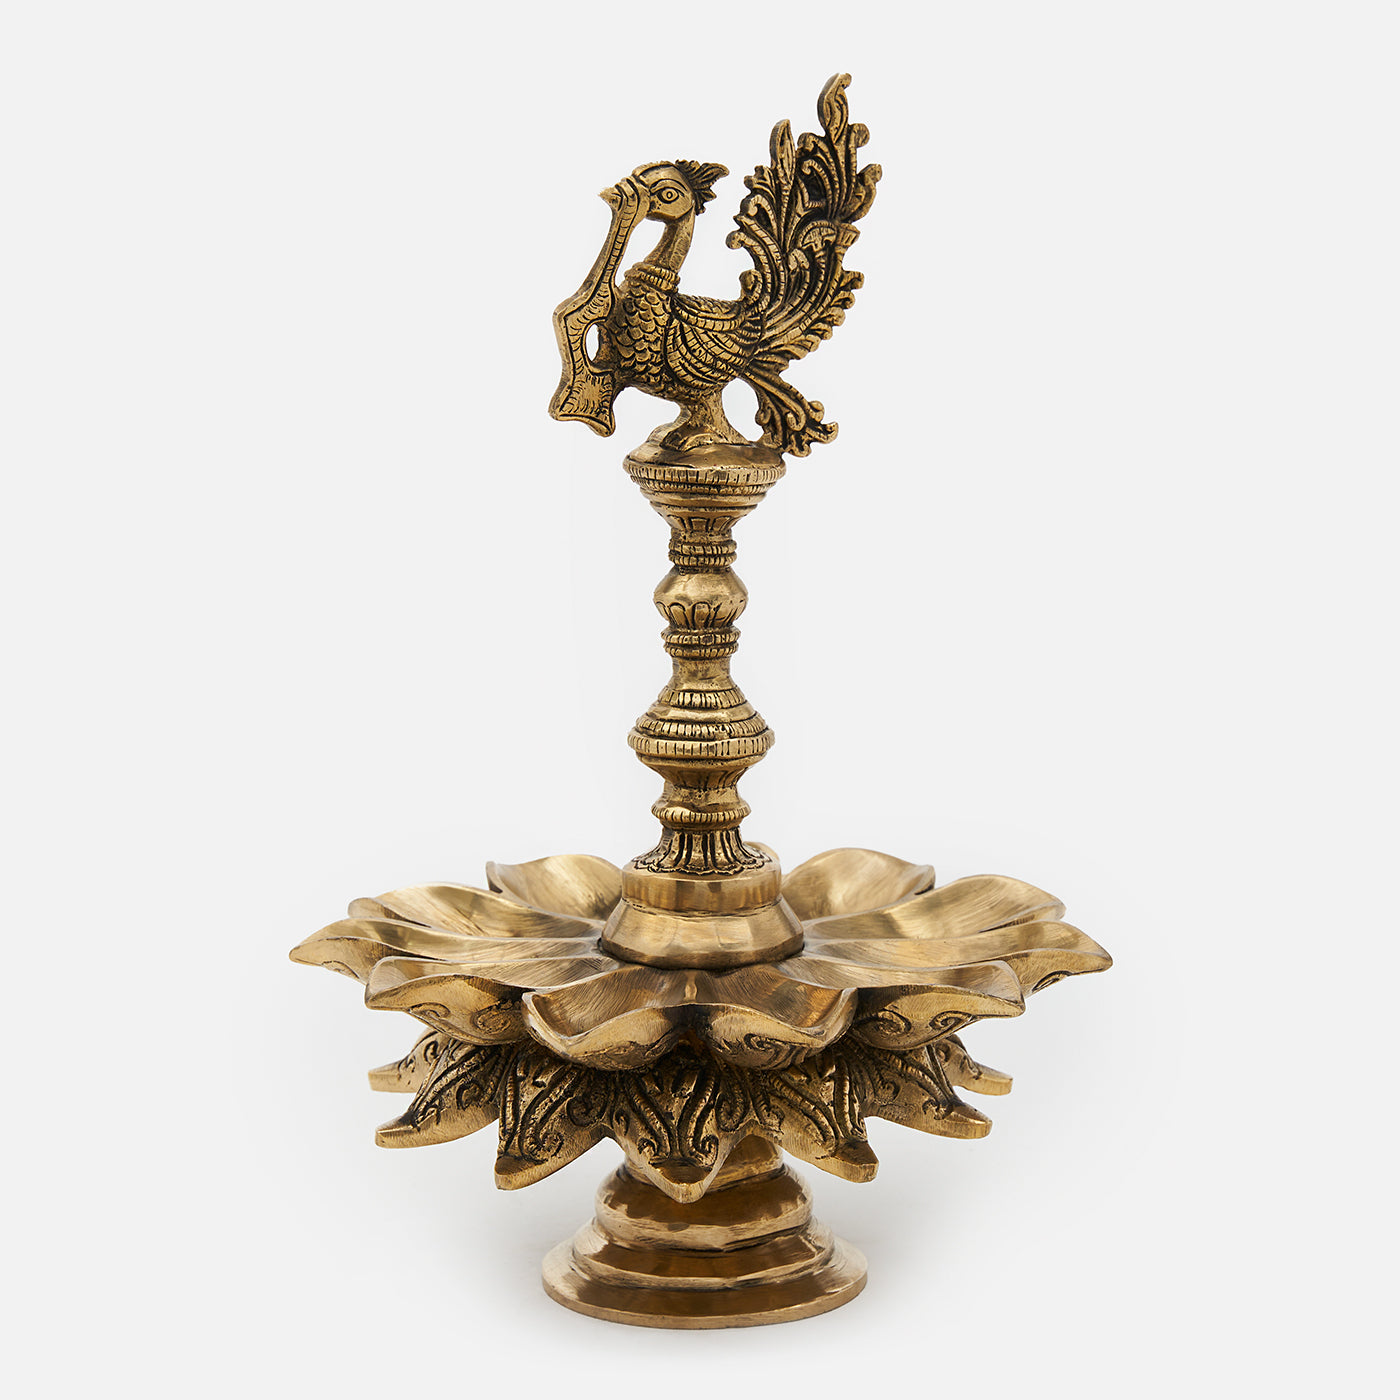 Brass Annapakshi Brass Diya: A Treasured Addition to Your Collection